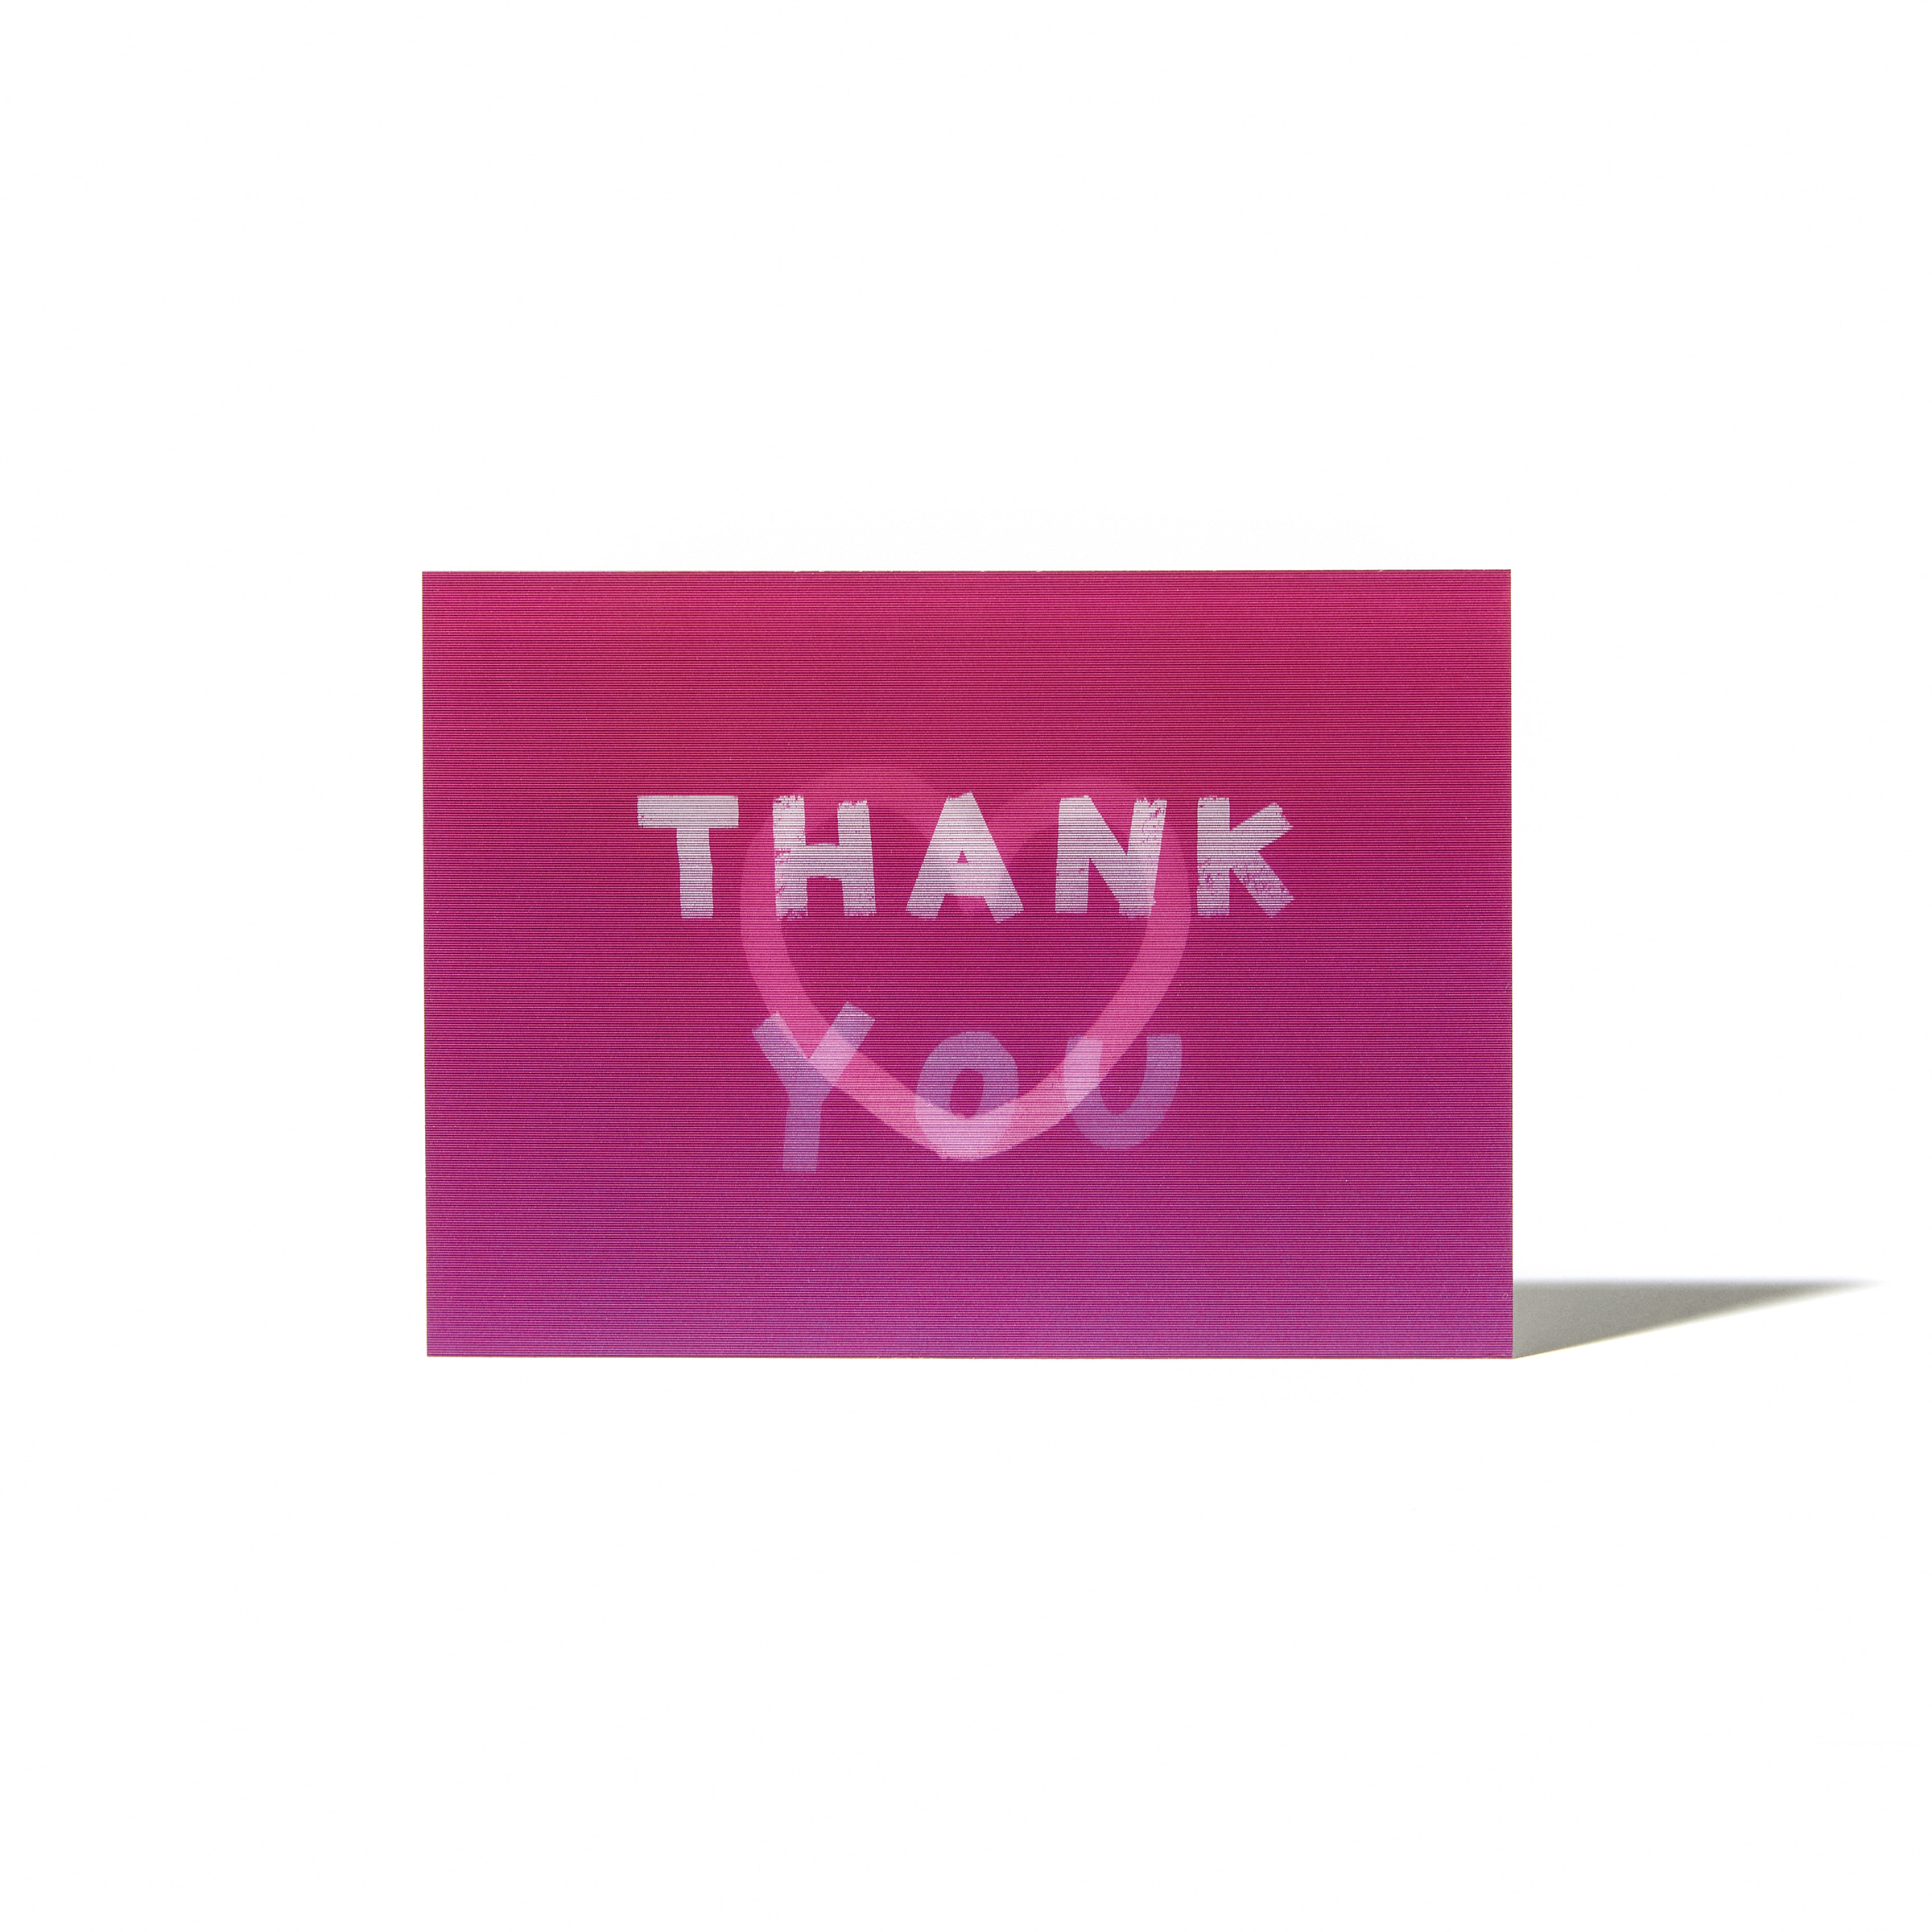 28. Lenticular Post Card - THANK YOU